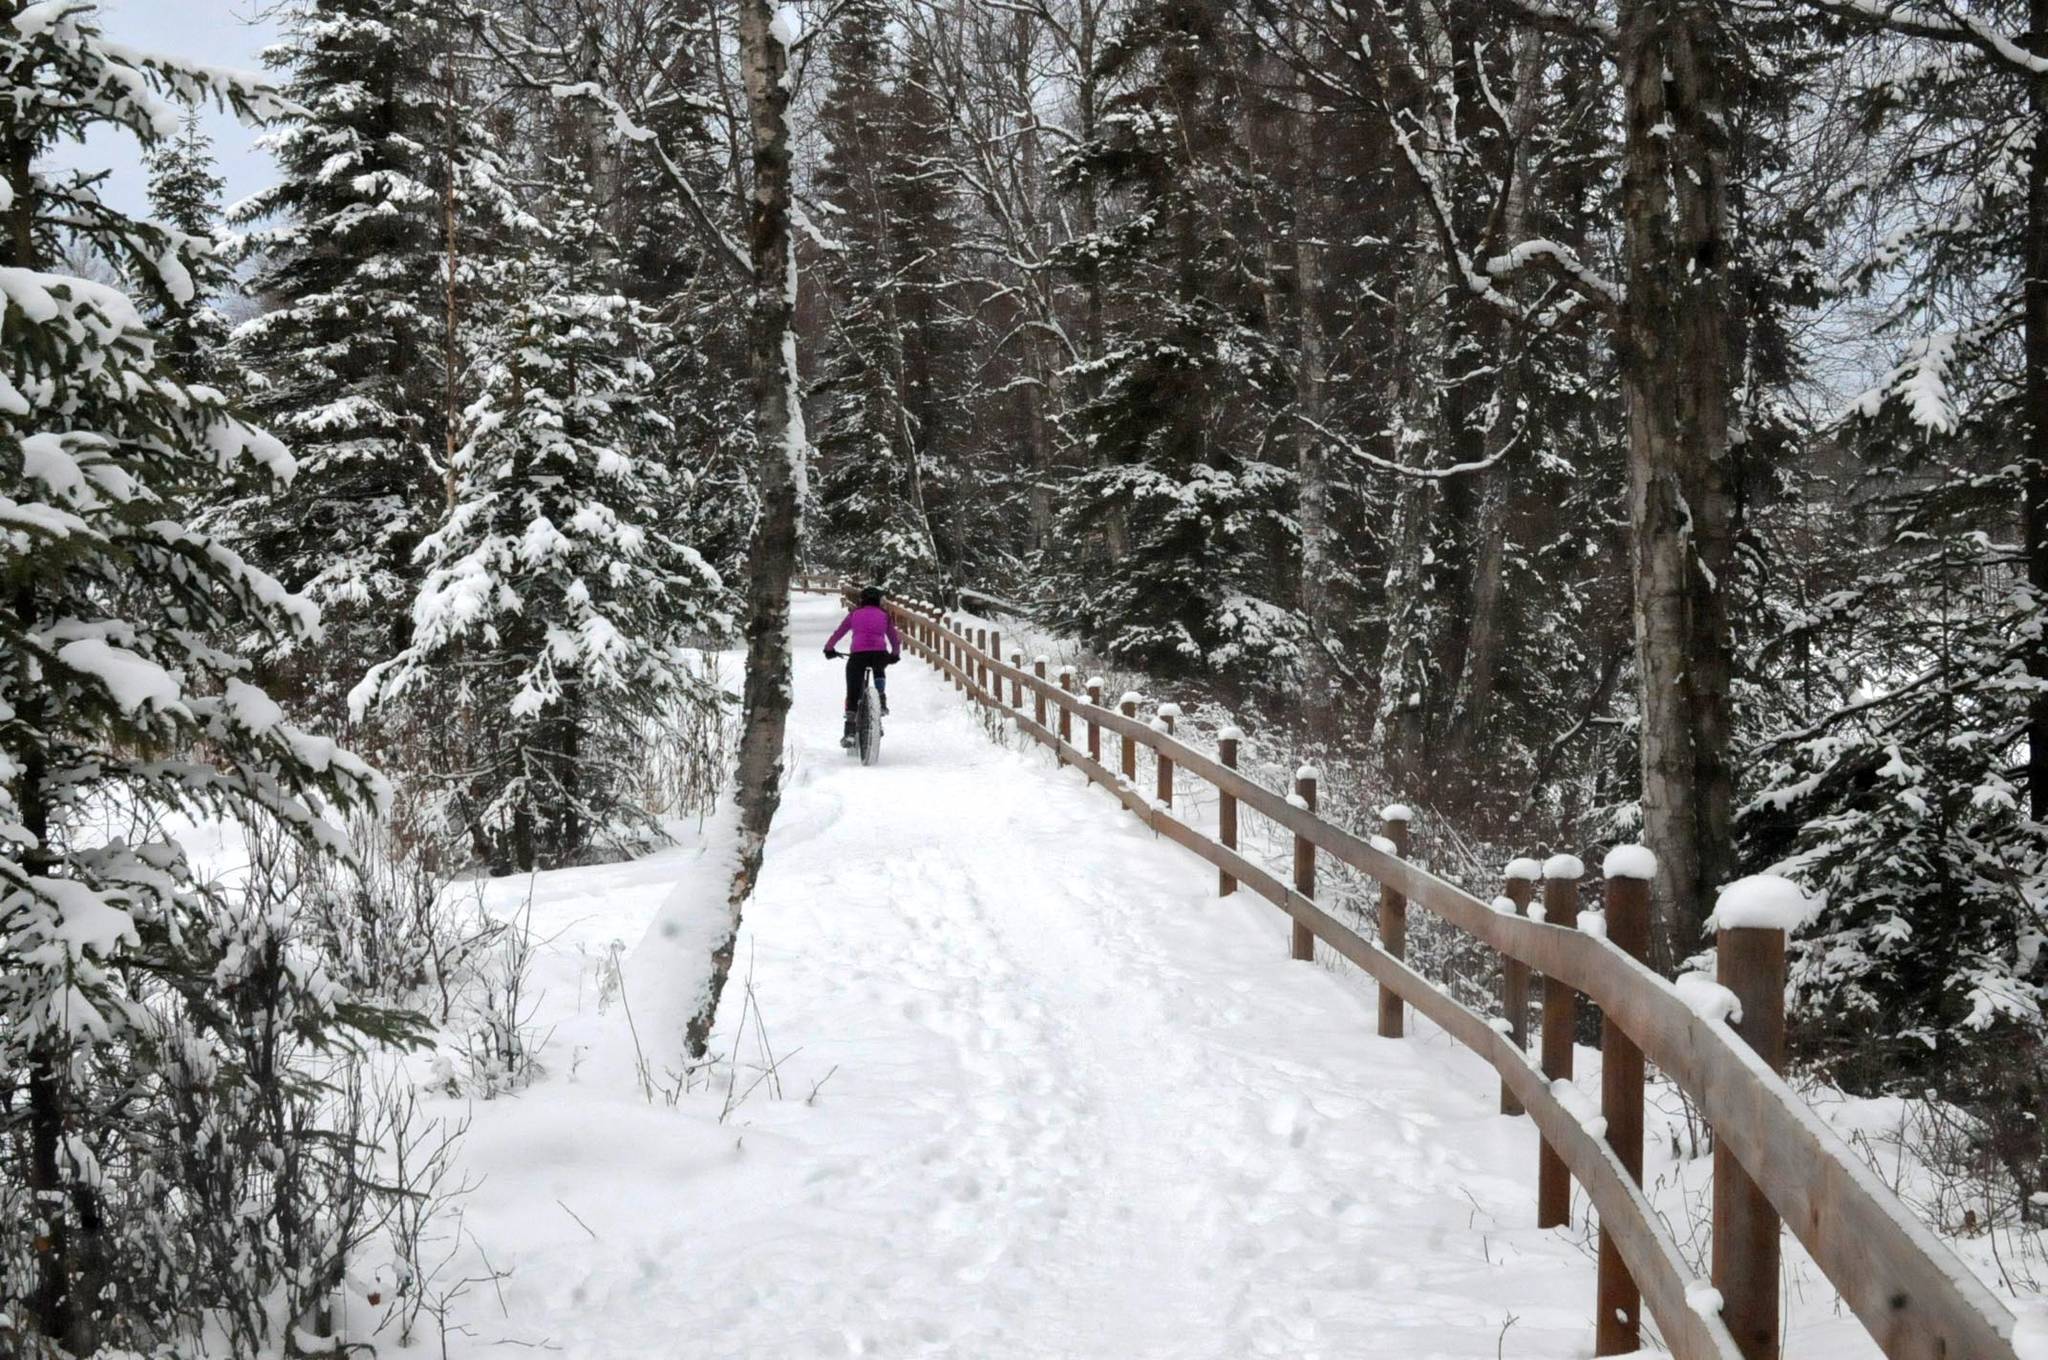 A bicyclist makes her way down the path at Centennial Park on Sunday, Feb. 11, 2018 in Soldotna, Alaska. The Soldotna Department of Parks and Recreation recently began grooming the loop trail at Centennial Park for multiple uses, from walking to skiing to biking. The central Kenai Peninsula got a fresh coat of snow Saturday, with more predicted for Sunday night and Monday. (Photo by Elizabeth Earl/Peninsula Clarion)